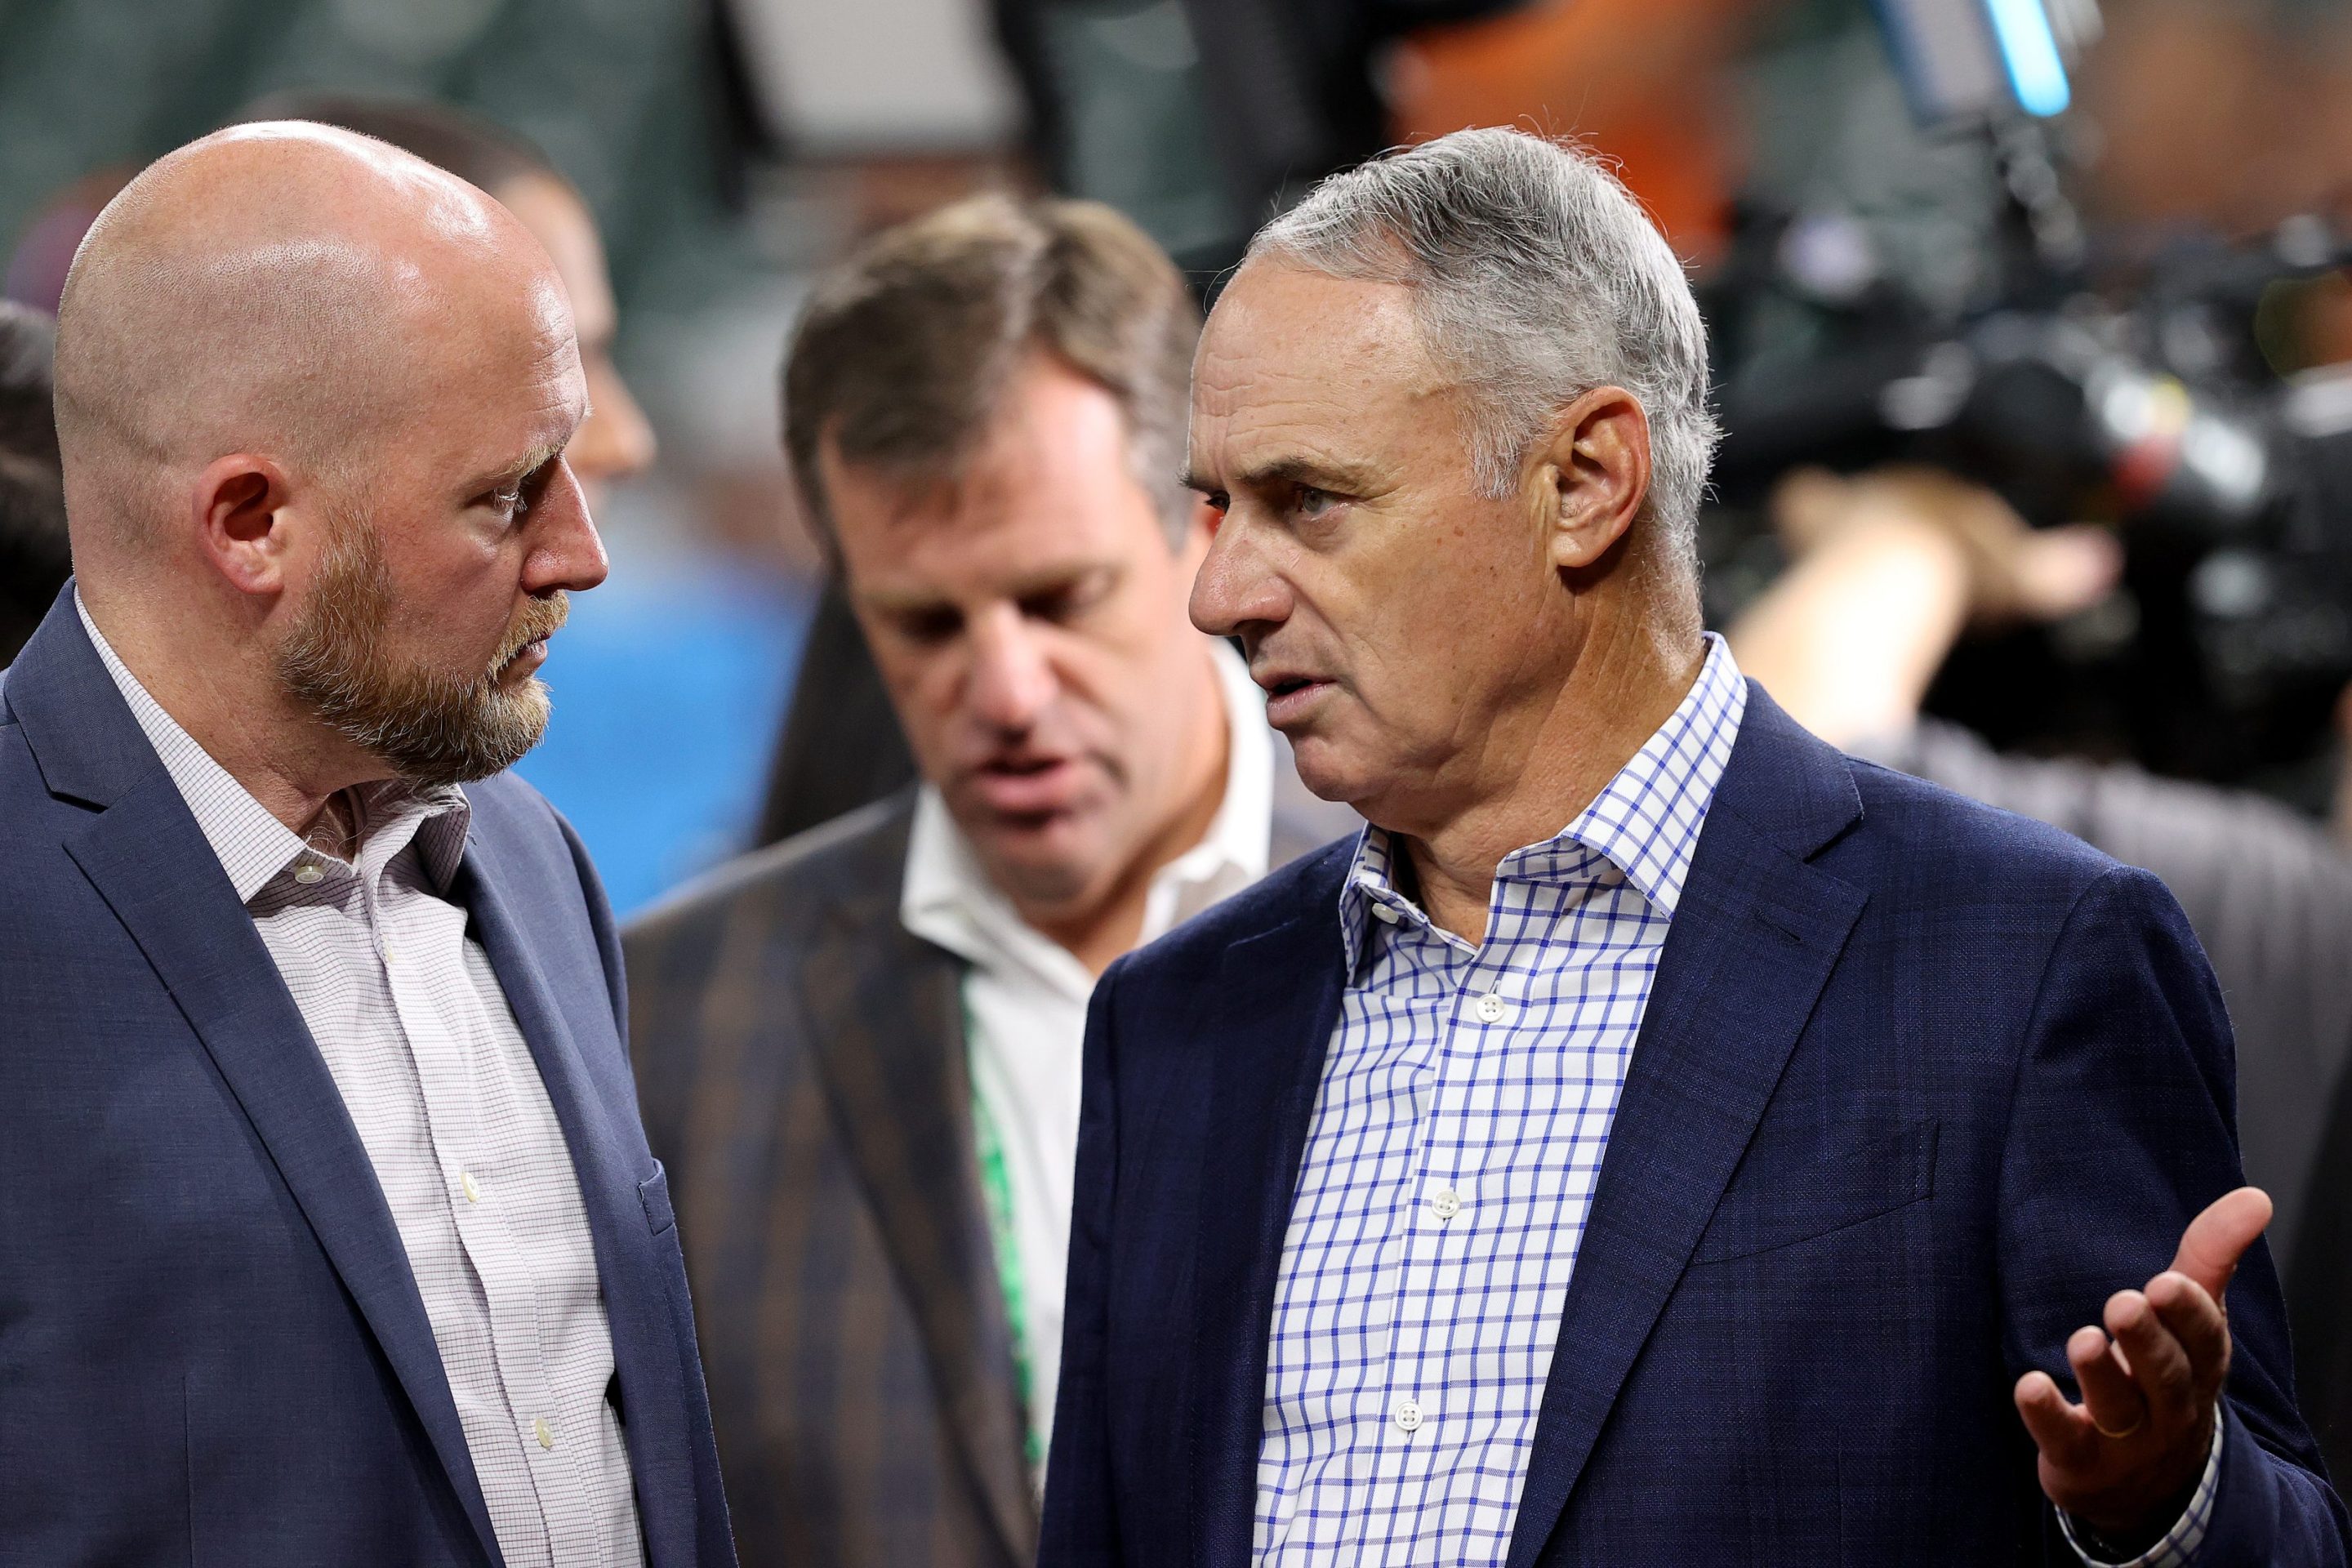 MLB Commissioner Rob Manfred talks to Astros GM James Click during the 2021 World Series.